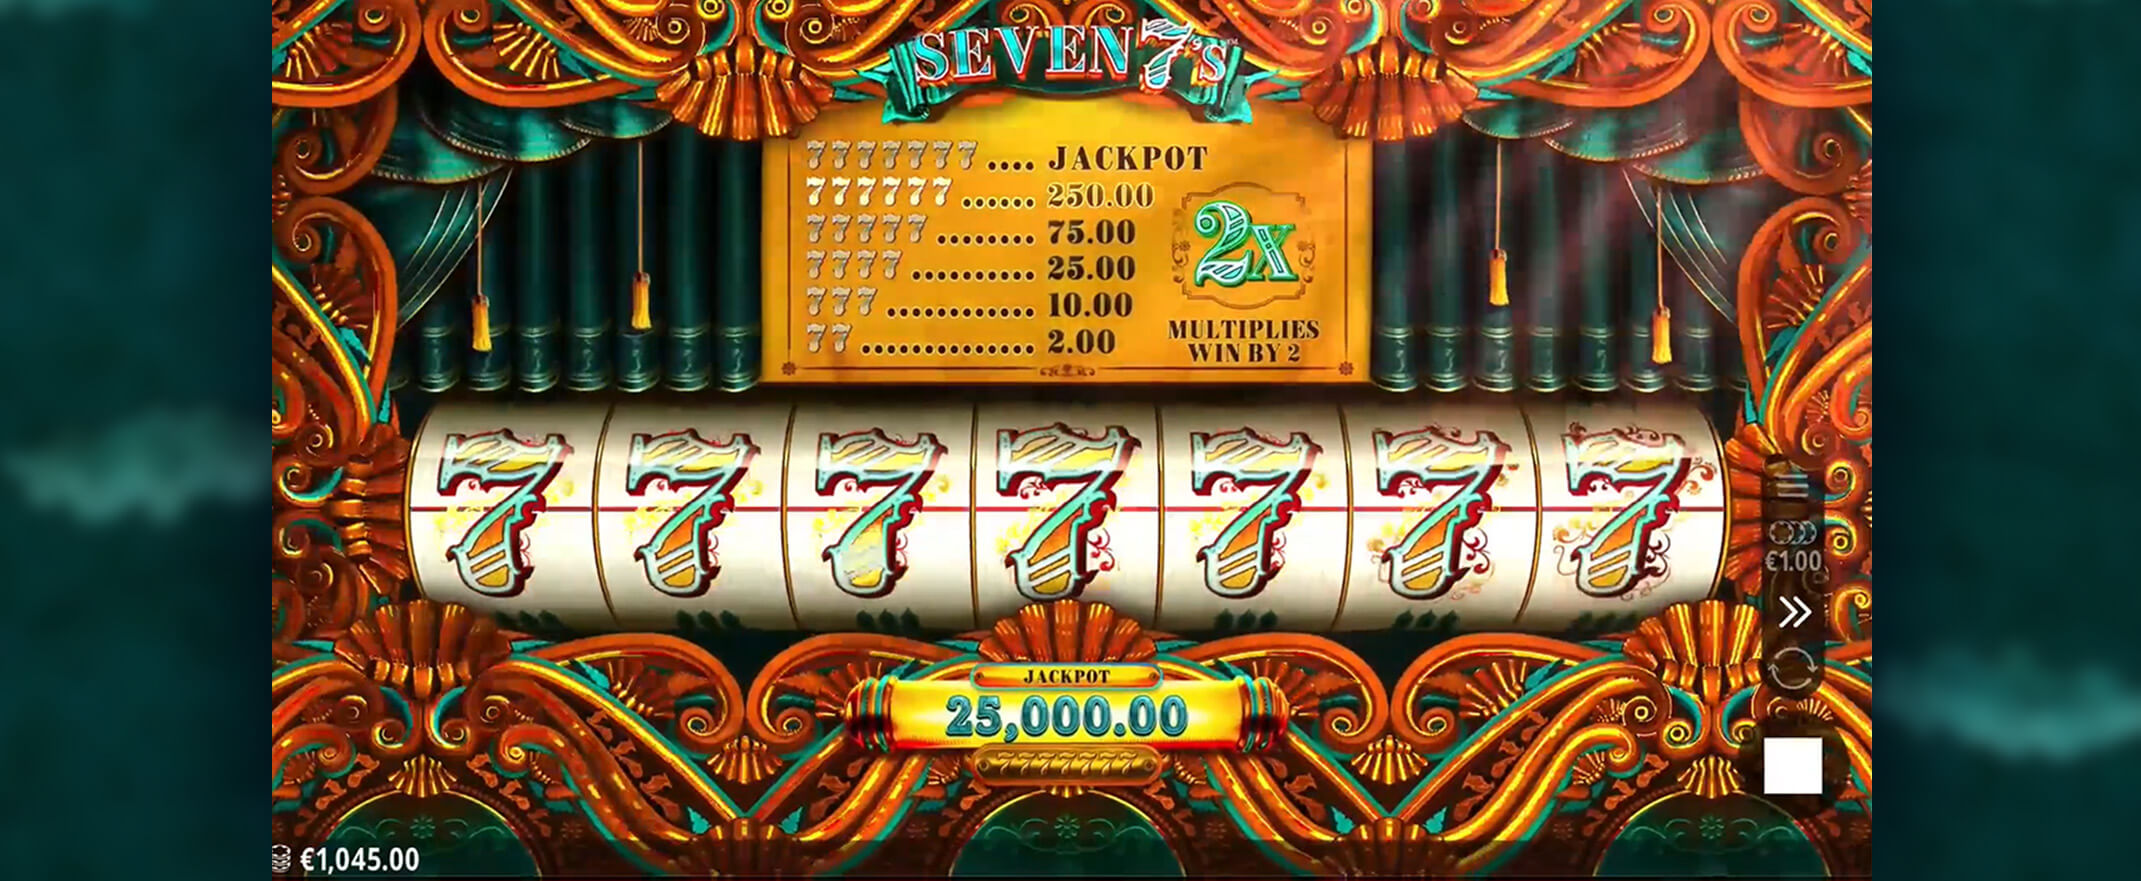 Seven 7's slot review - image of the slot reels